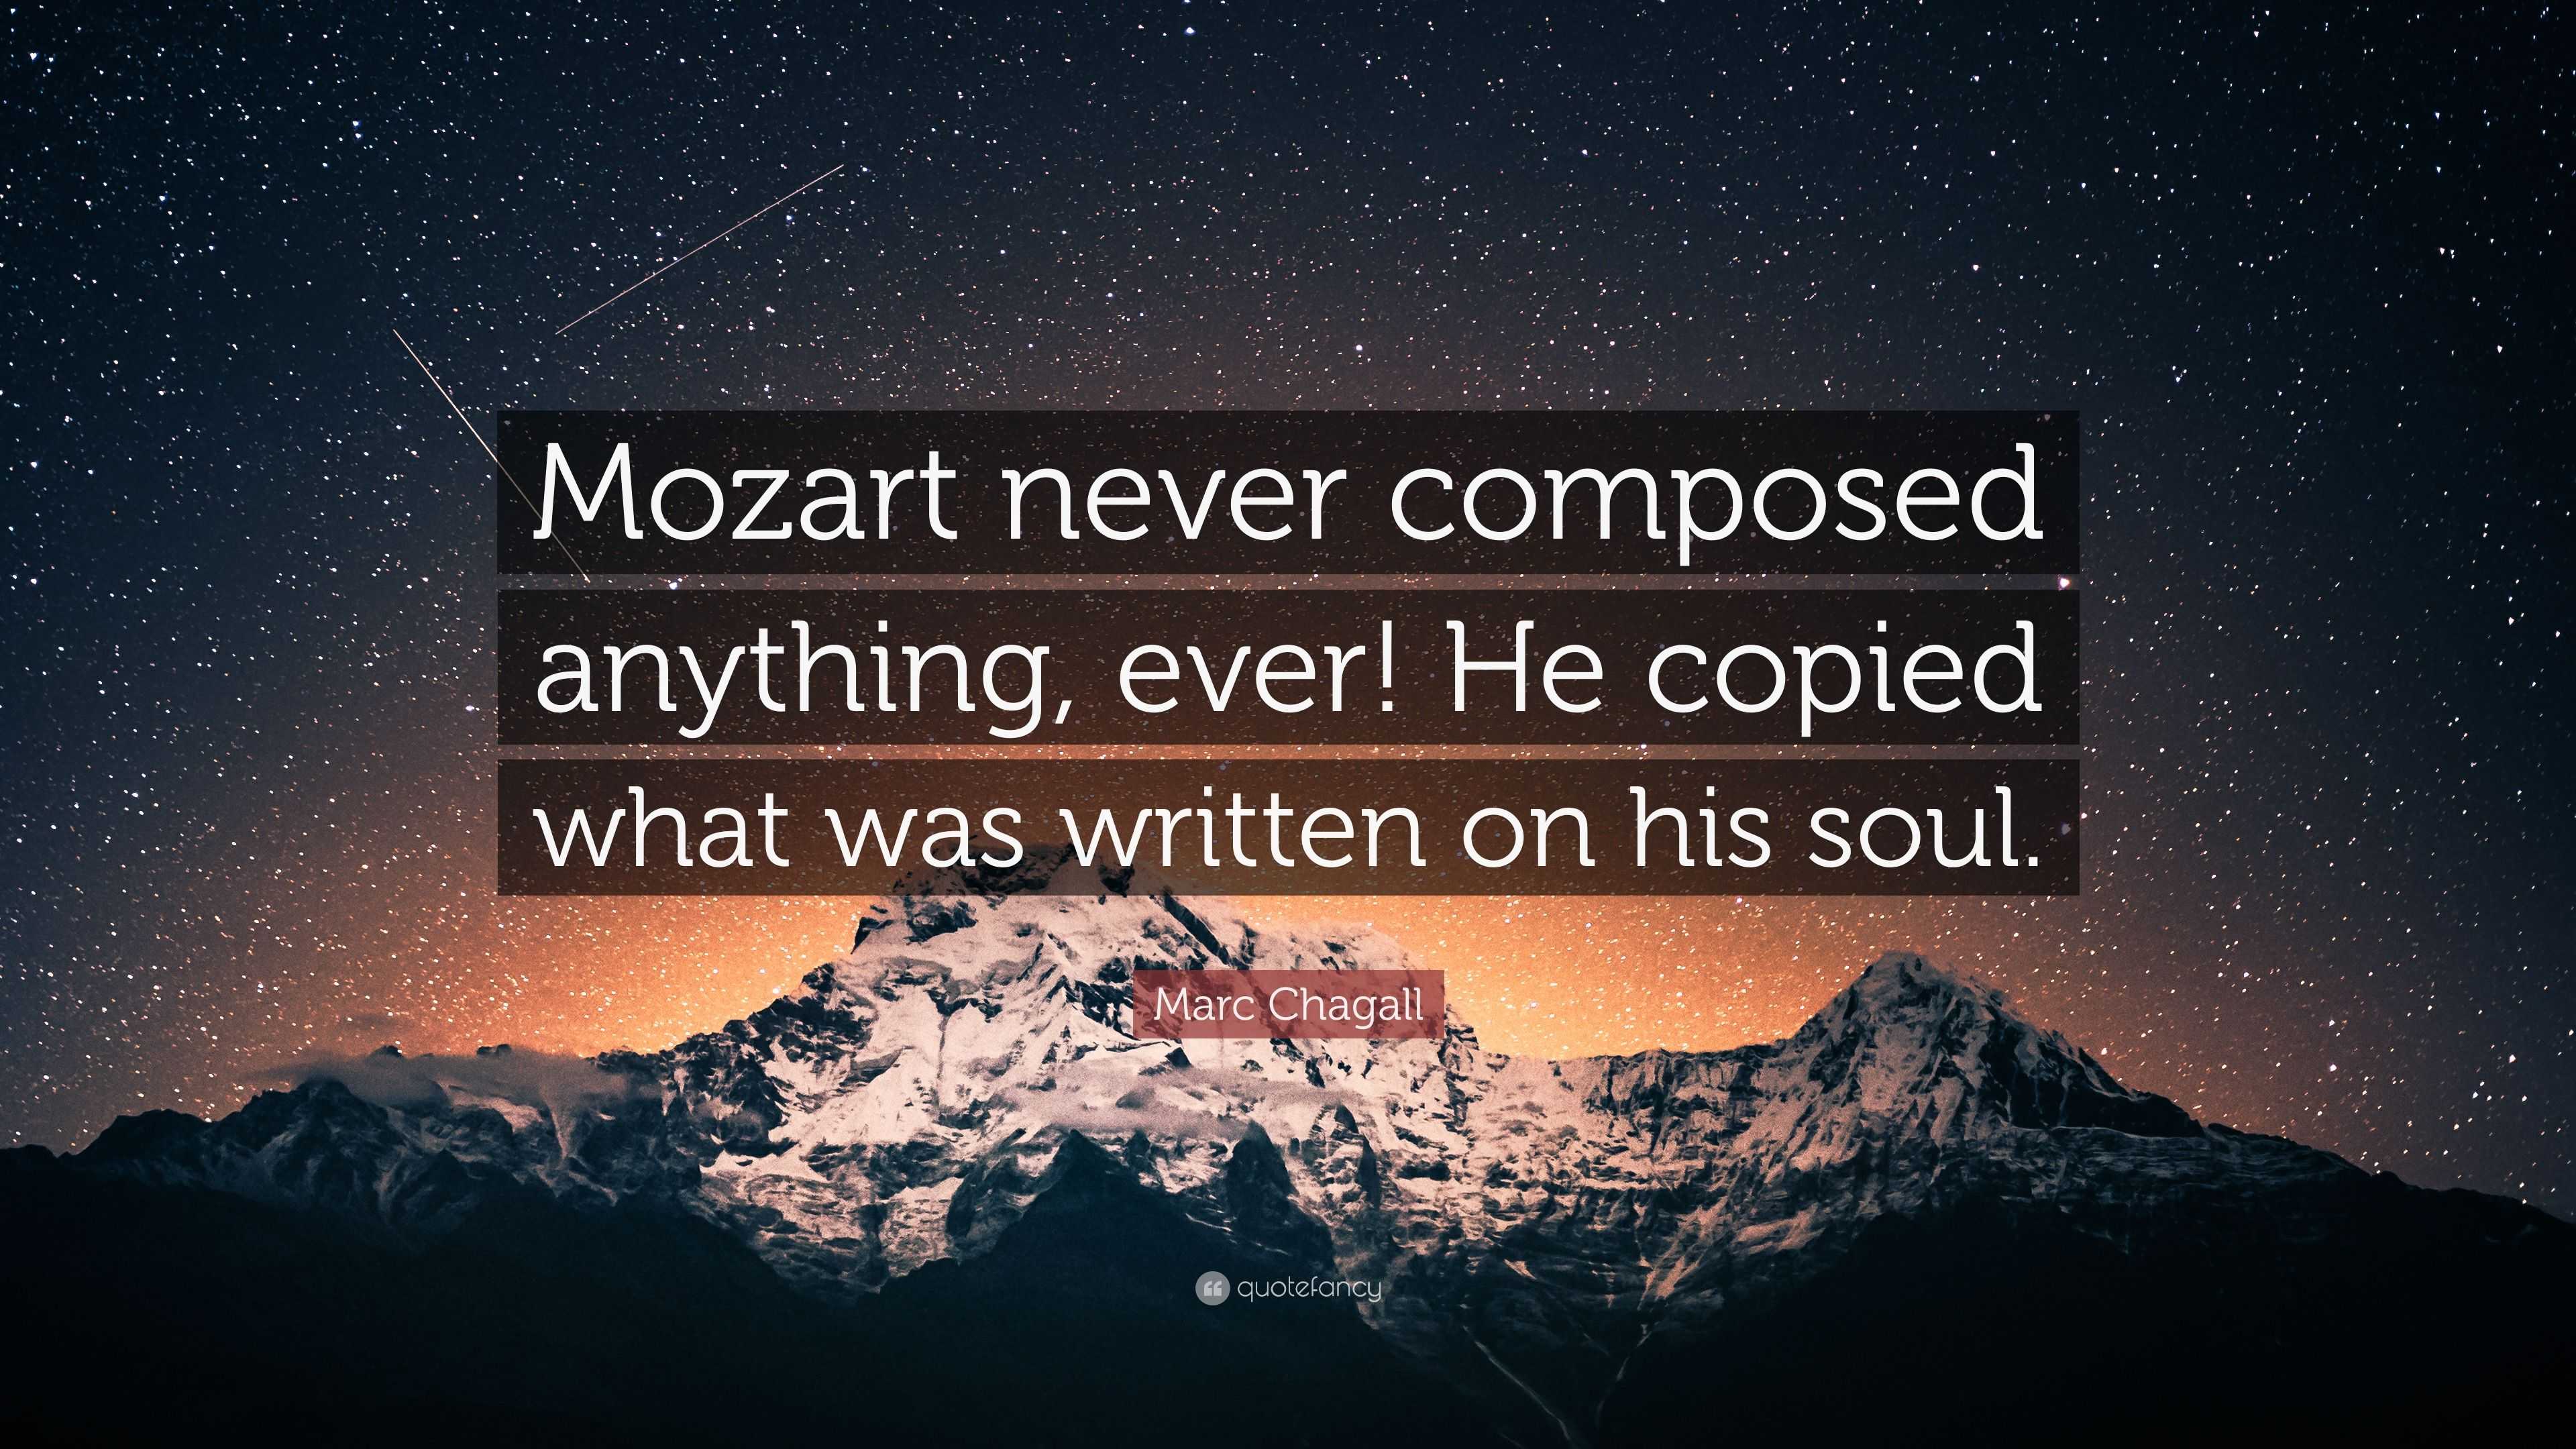 Marc Chagall Quote: “Mozart never composed anything, ever! He copied ...